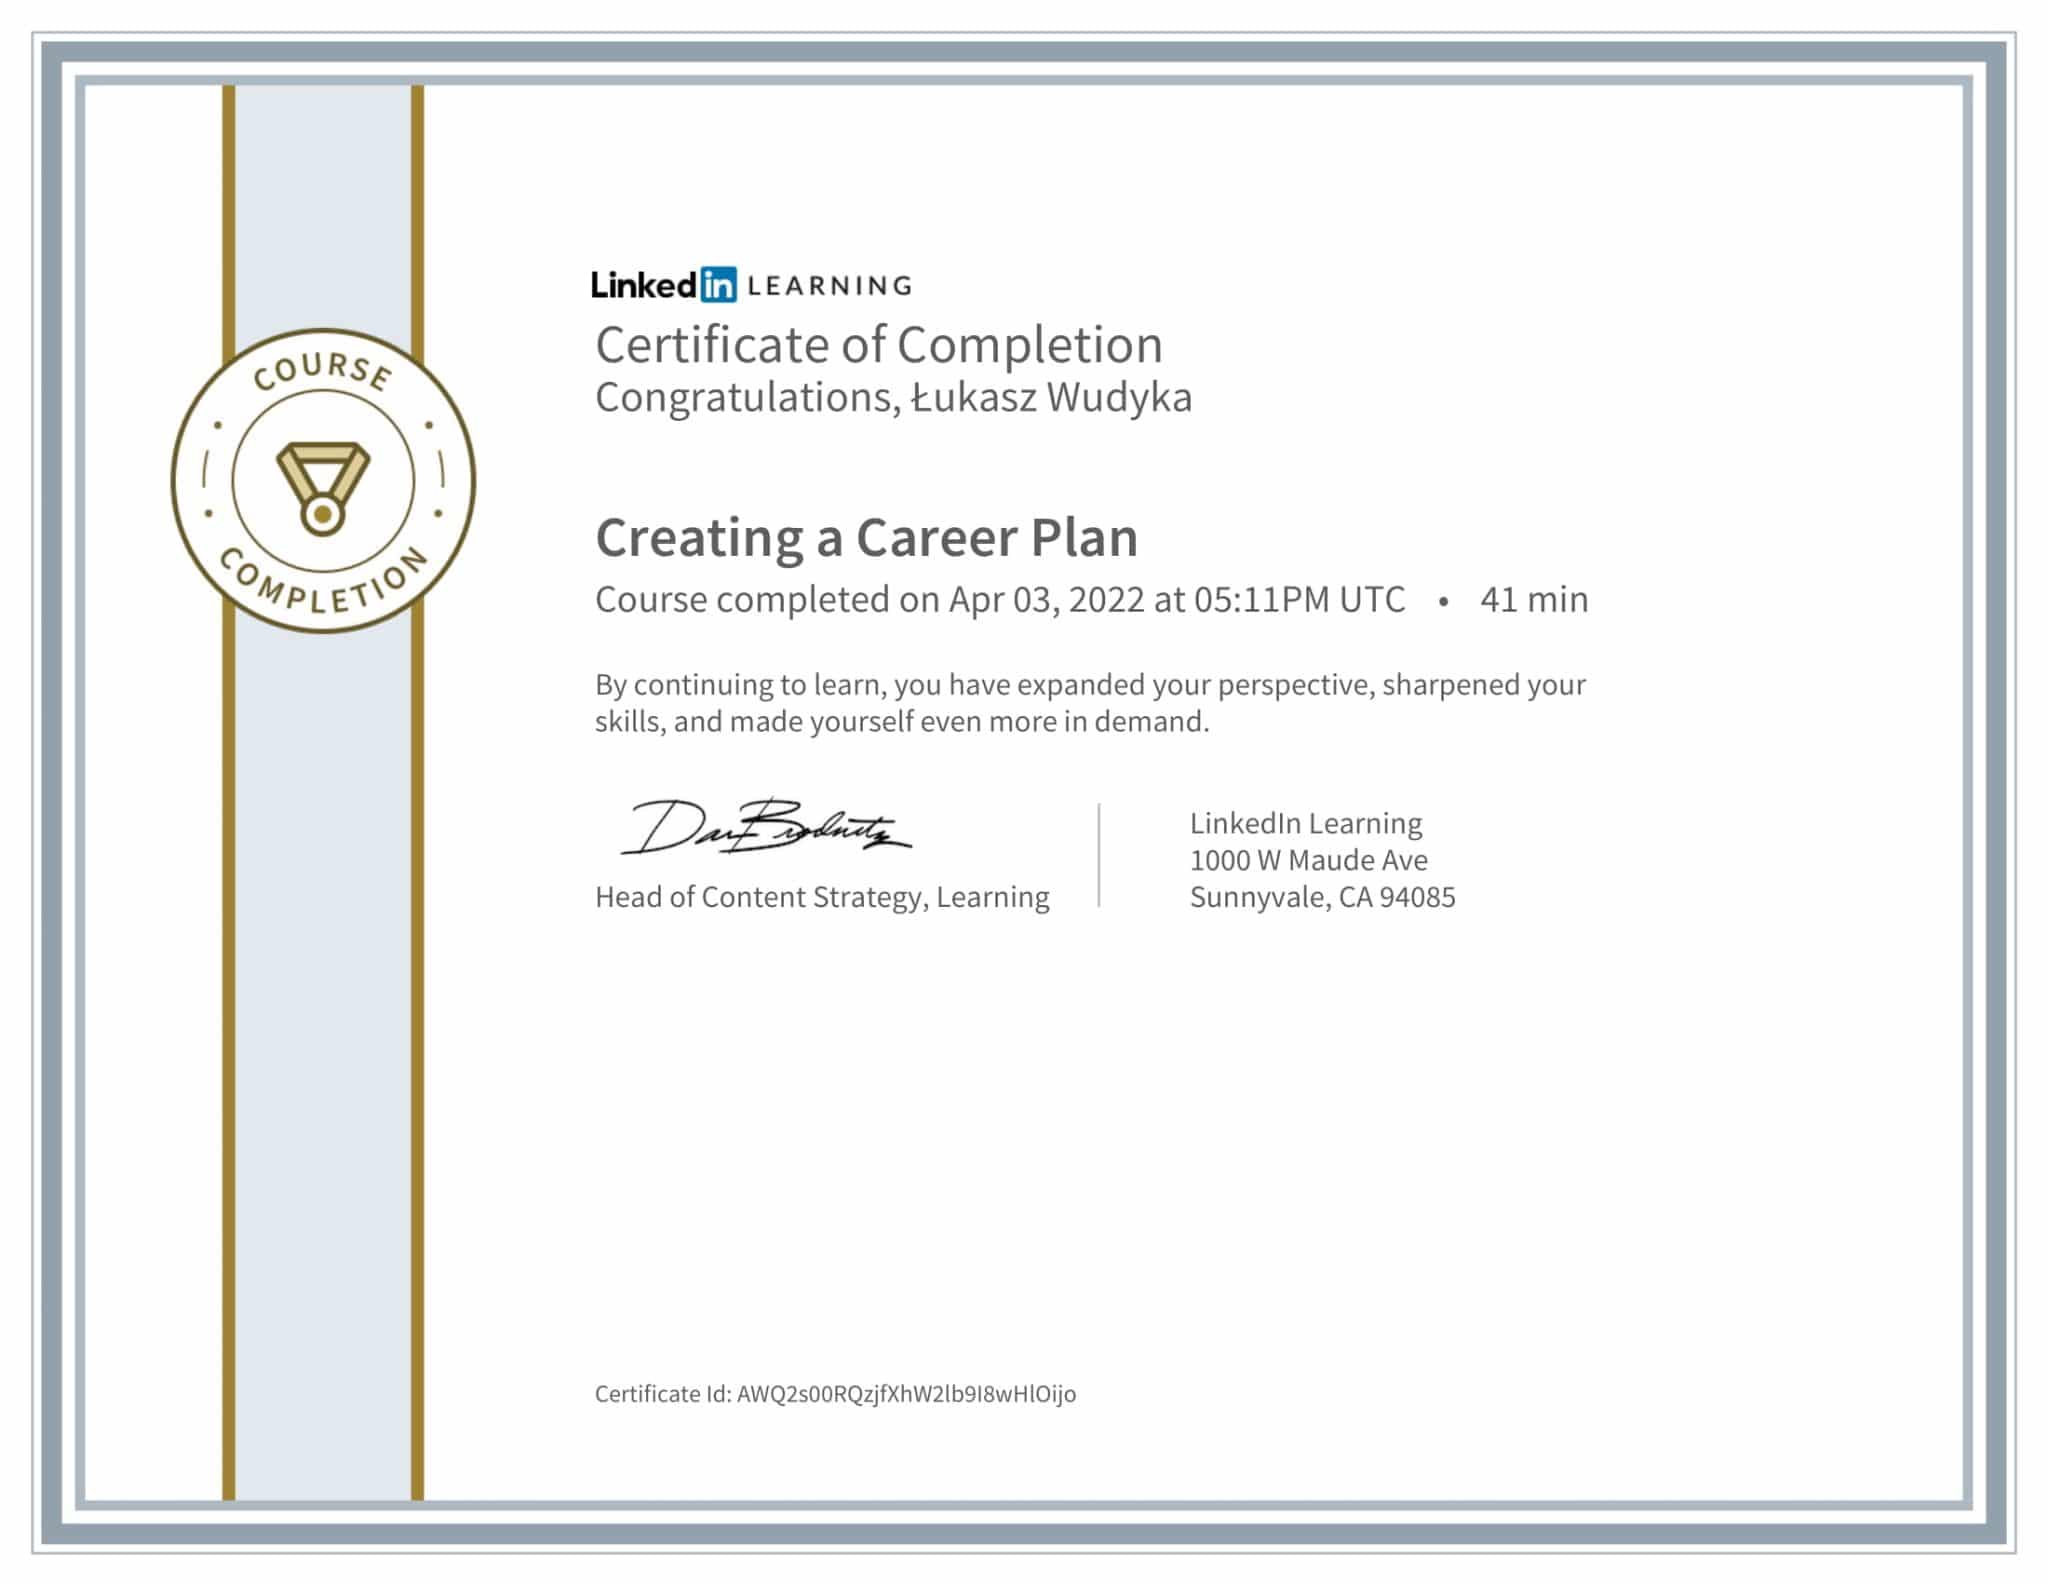 CertificateOfCompletion_Creating a Career Plan-1